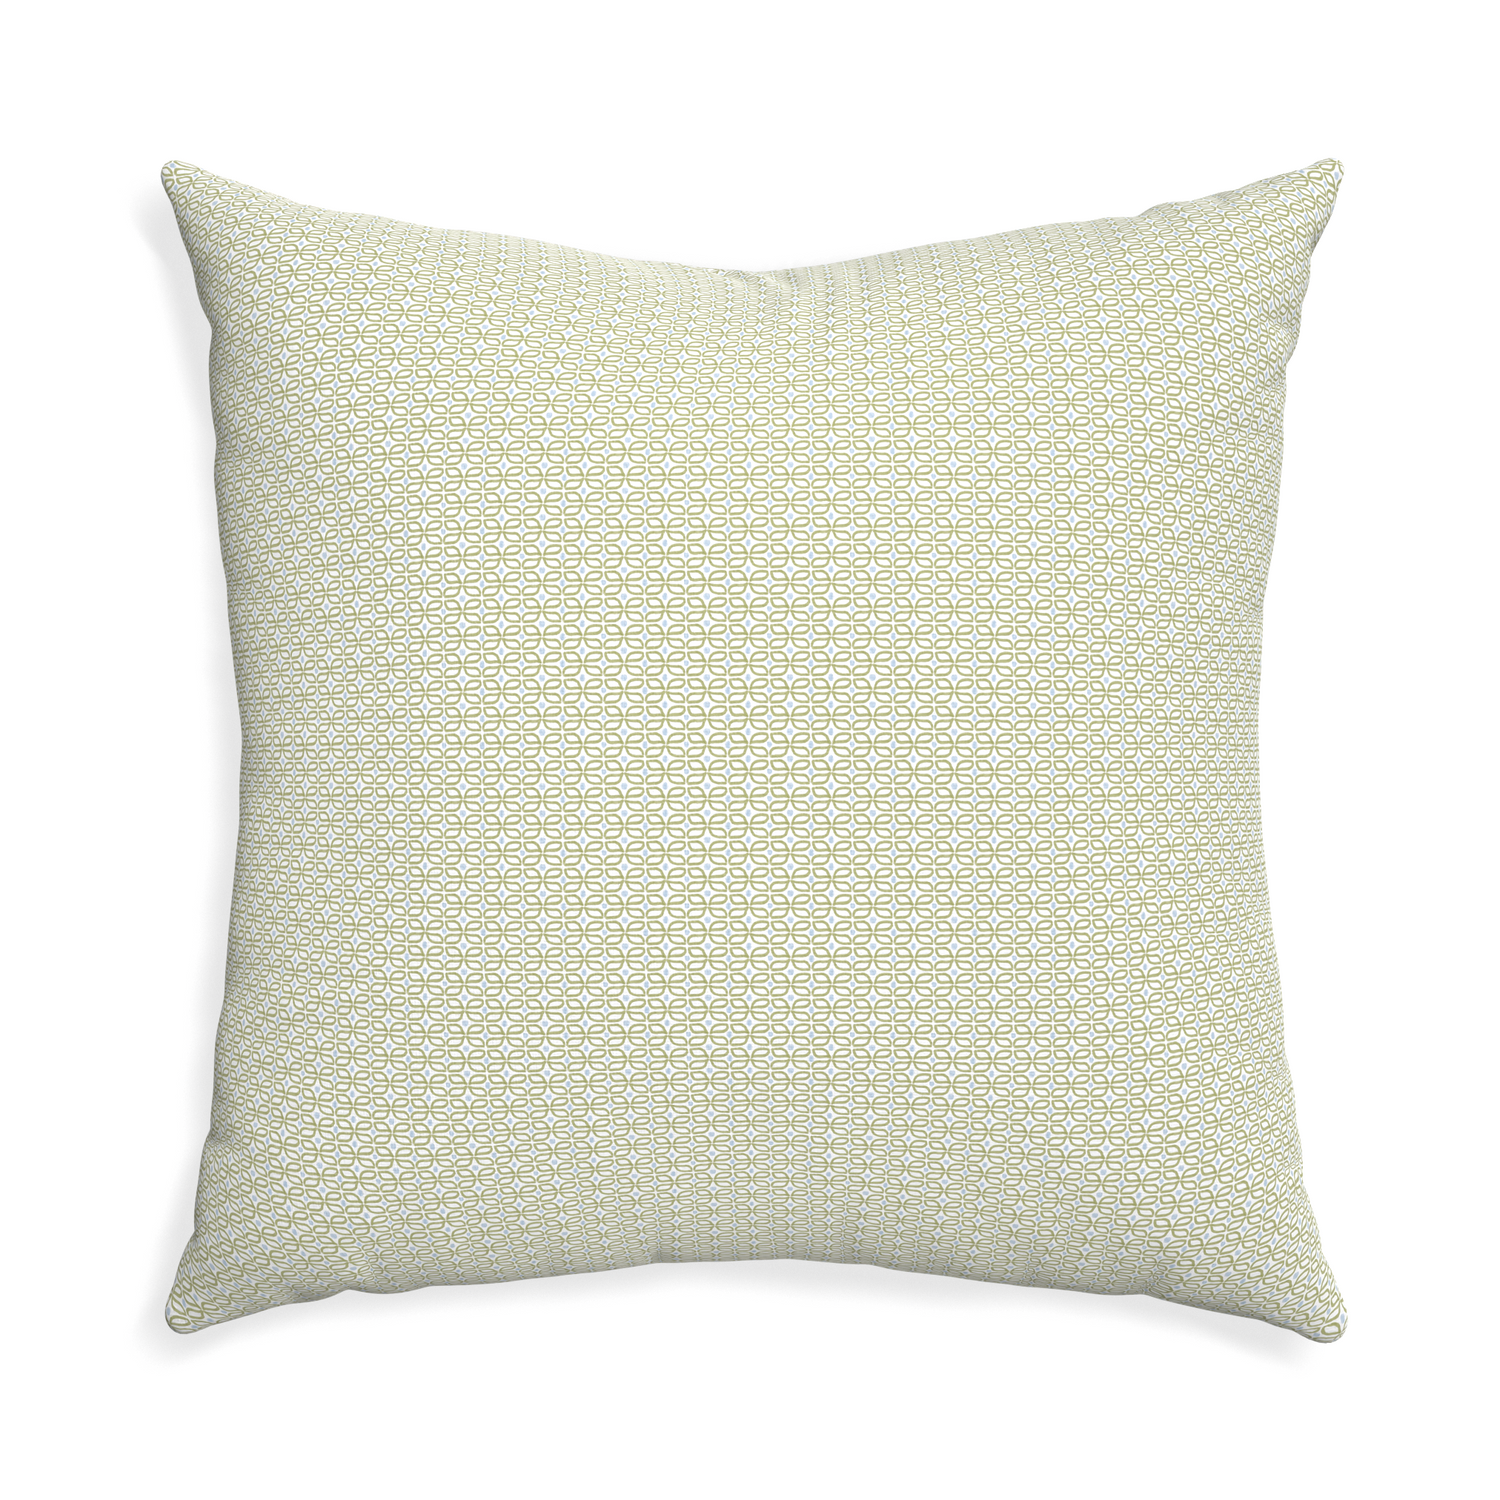 Euro-sham loomi moss custom pillow with none on white background